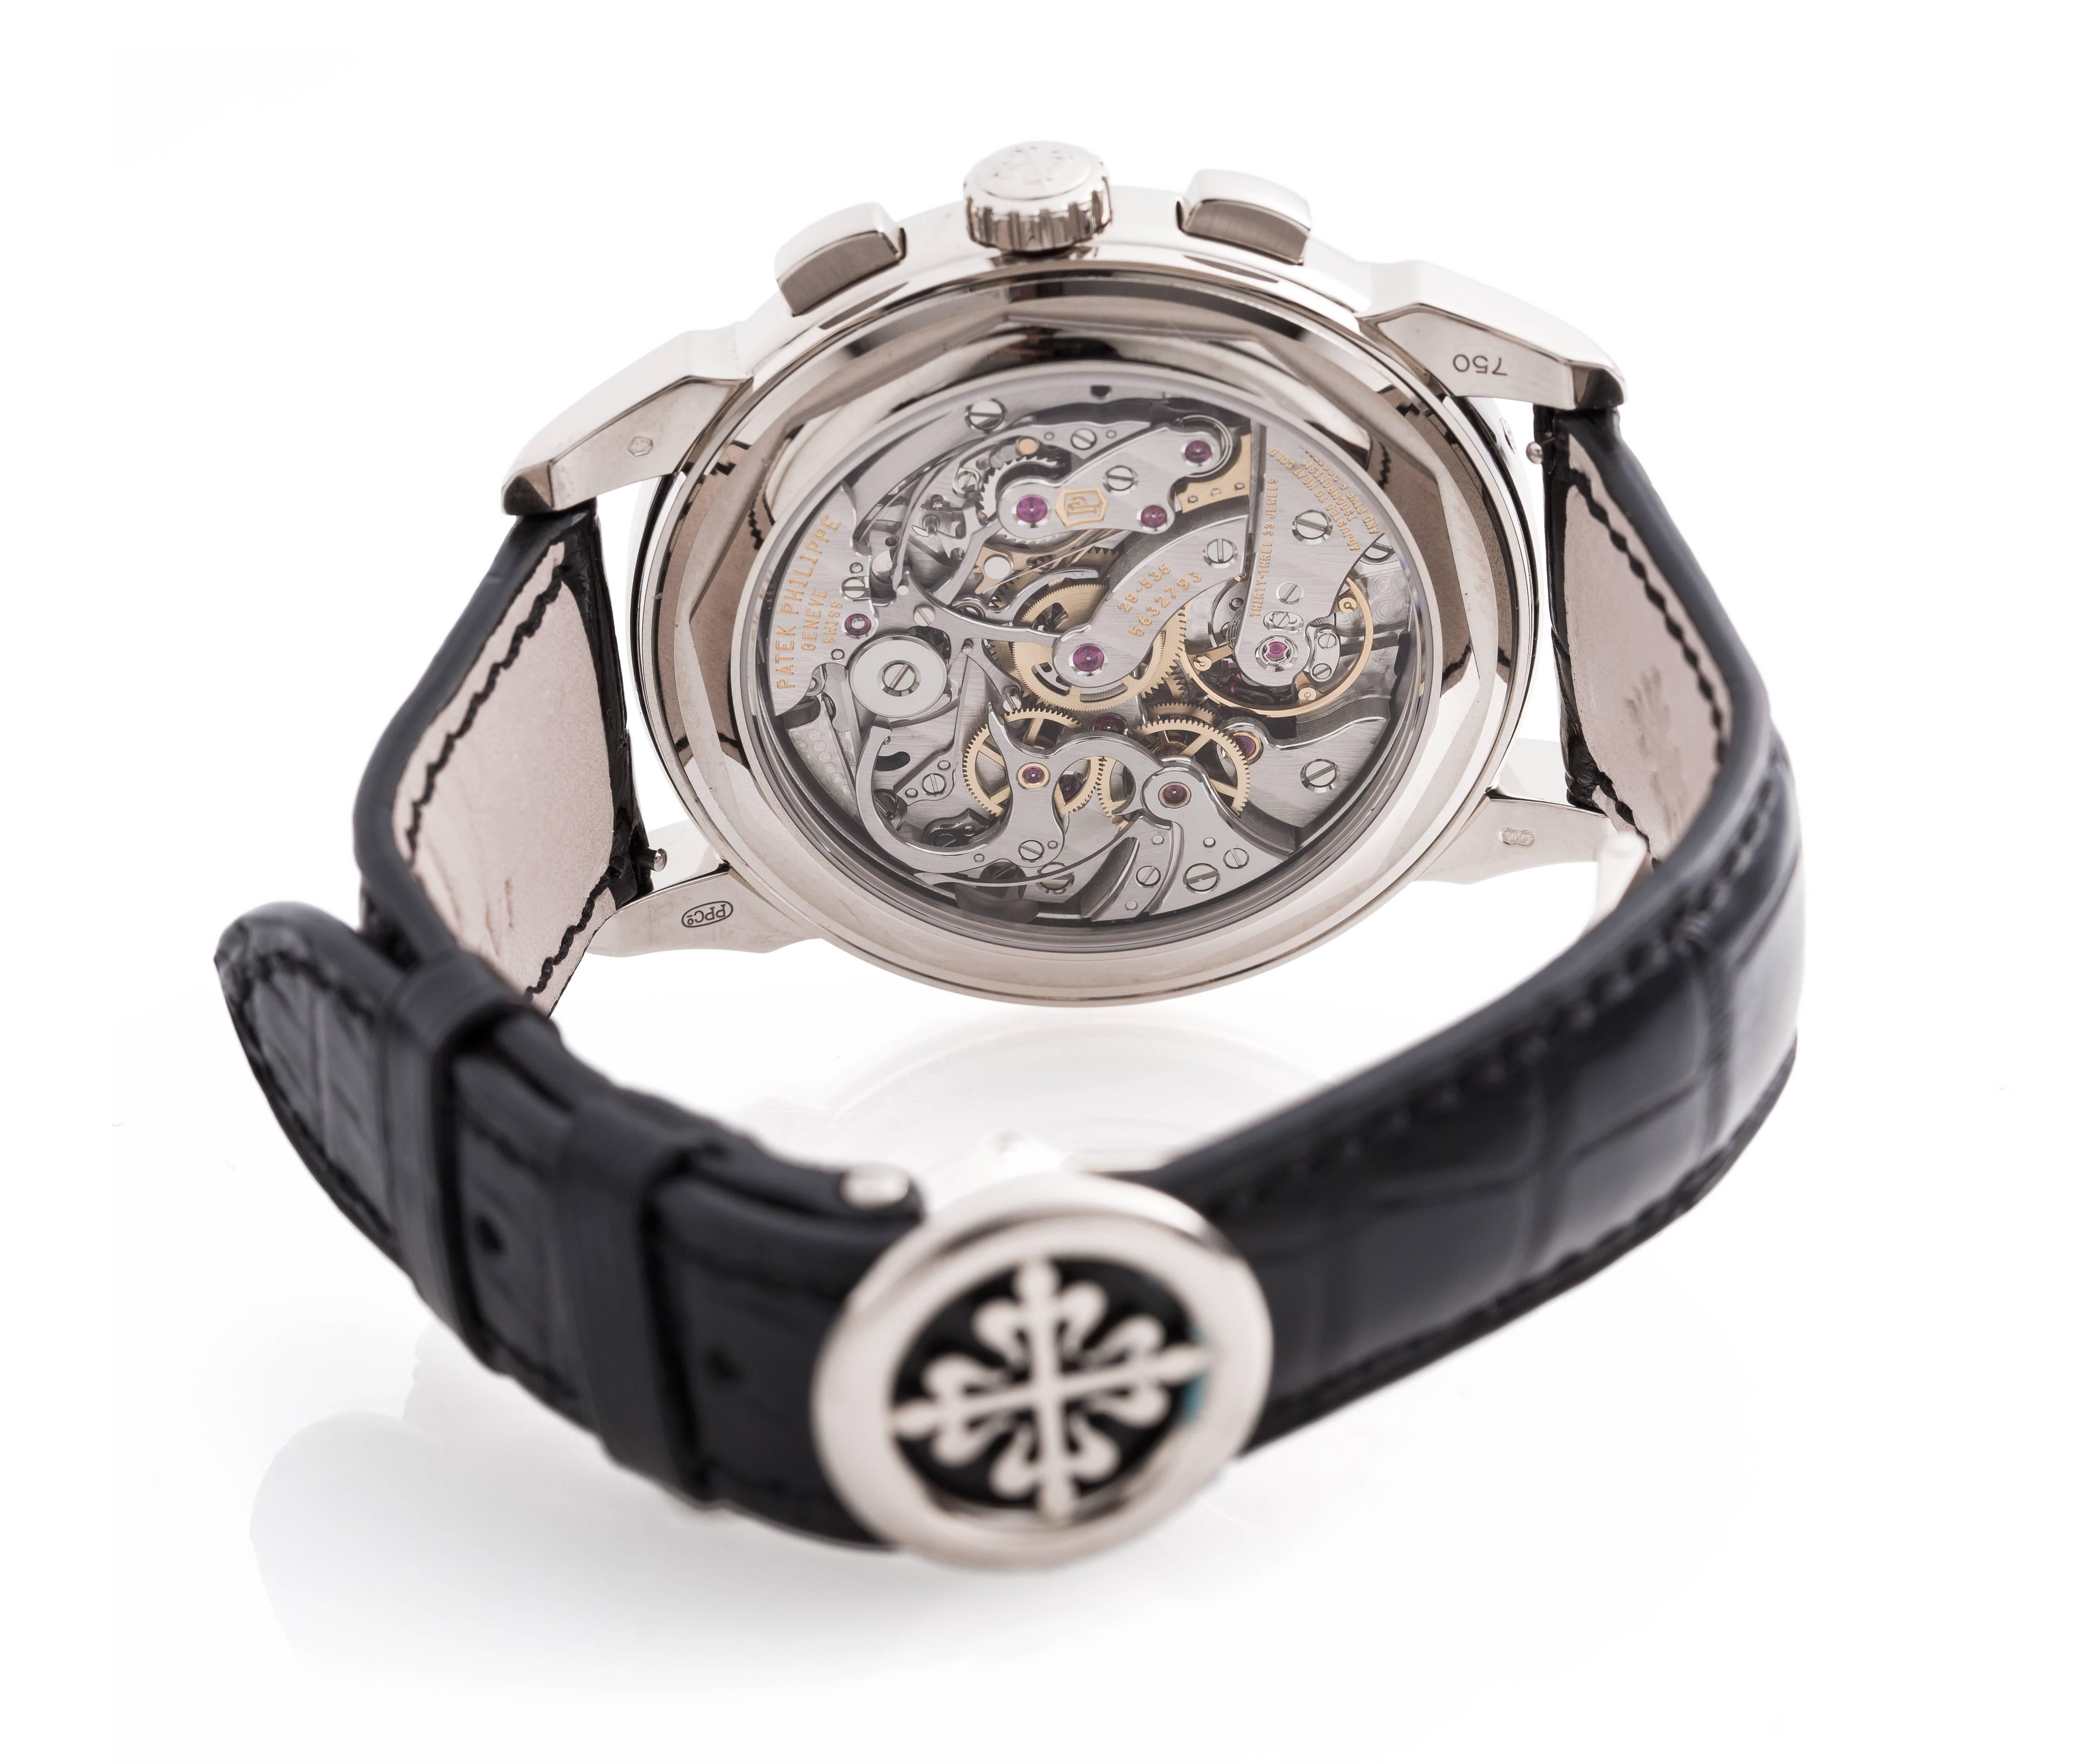 
Men's 5270G-018 - White Gold - Men - Grand Complications
Pre-owned in original plastic

    Manually wound mechanical movement
    Caliber CH 29-535 PS Q
    Chronograph
    Central chronograph hand and instantaneous 30-minute counter
   